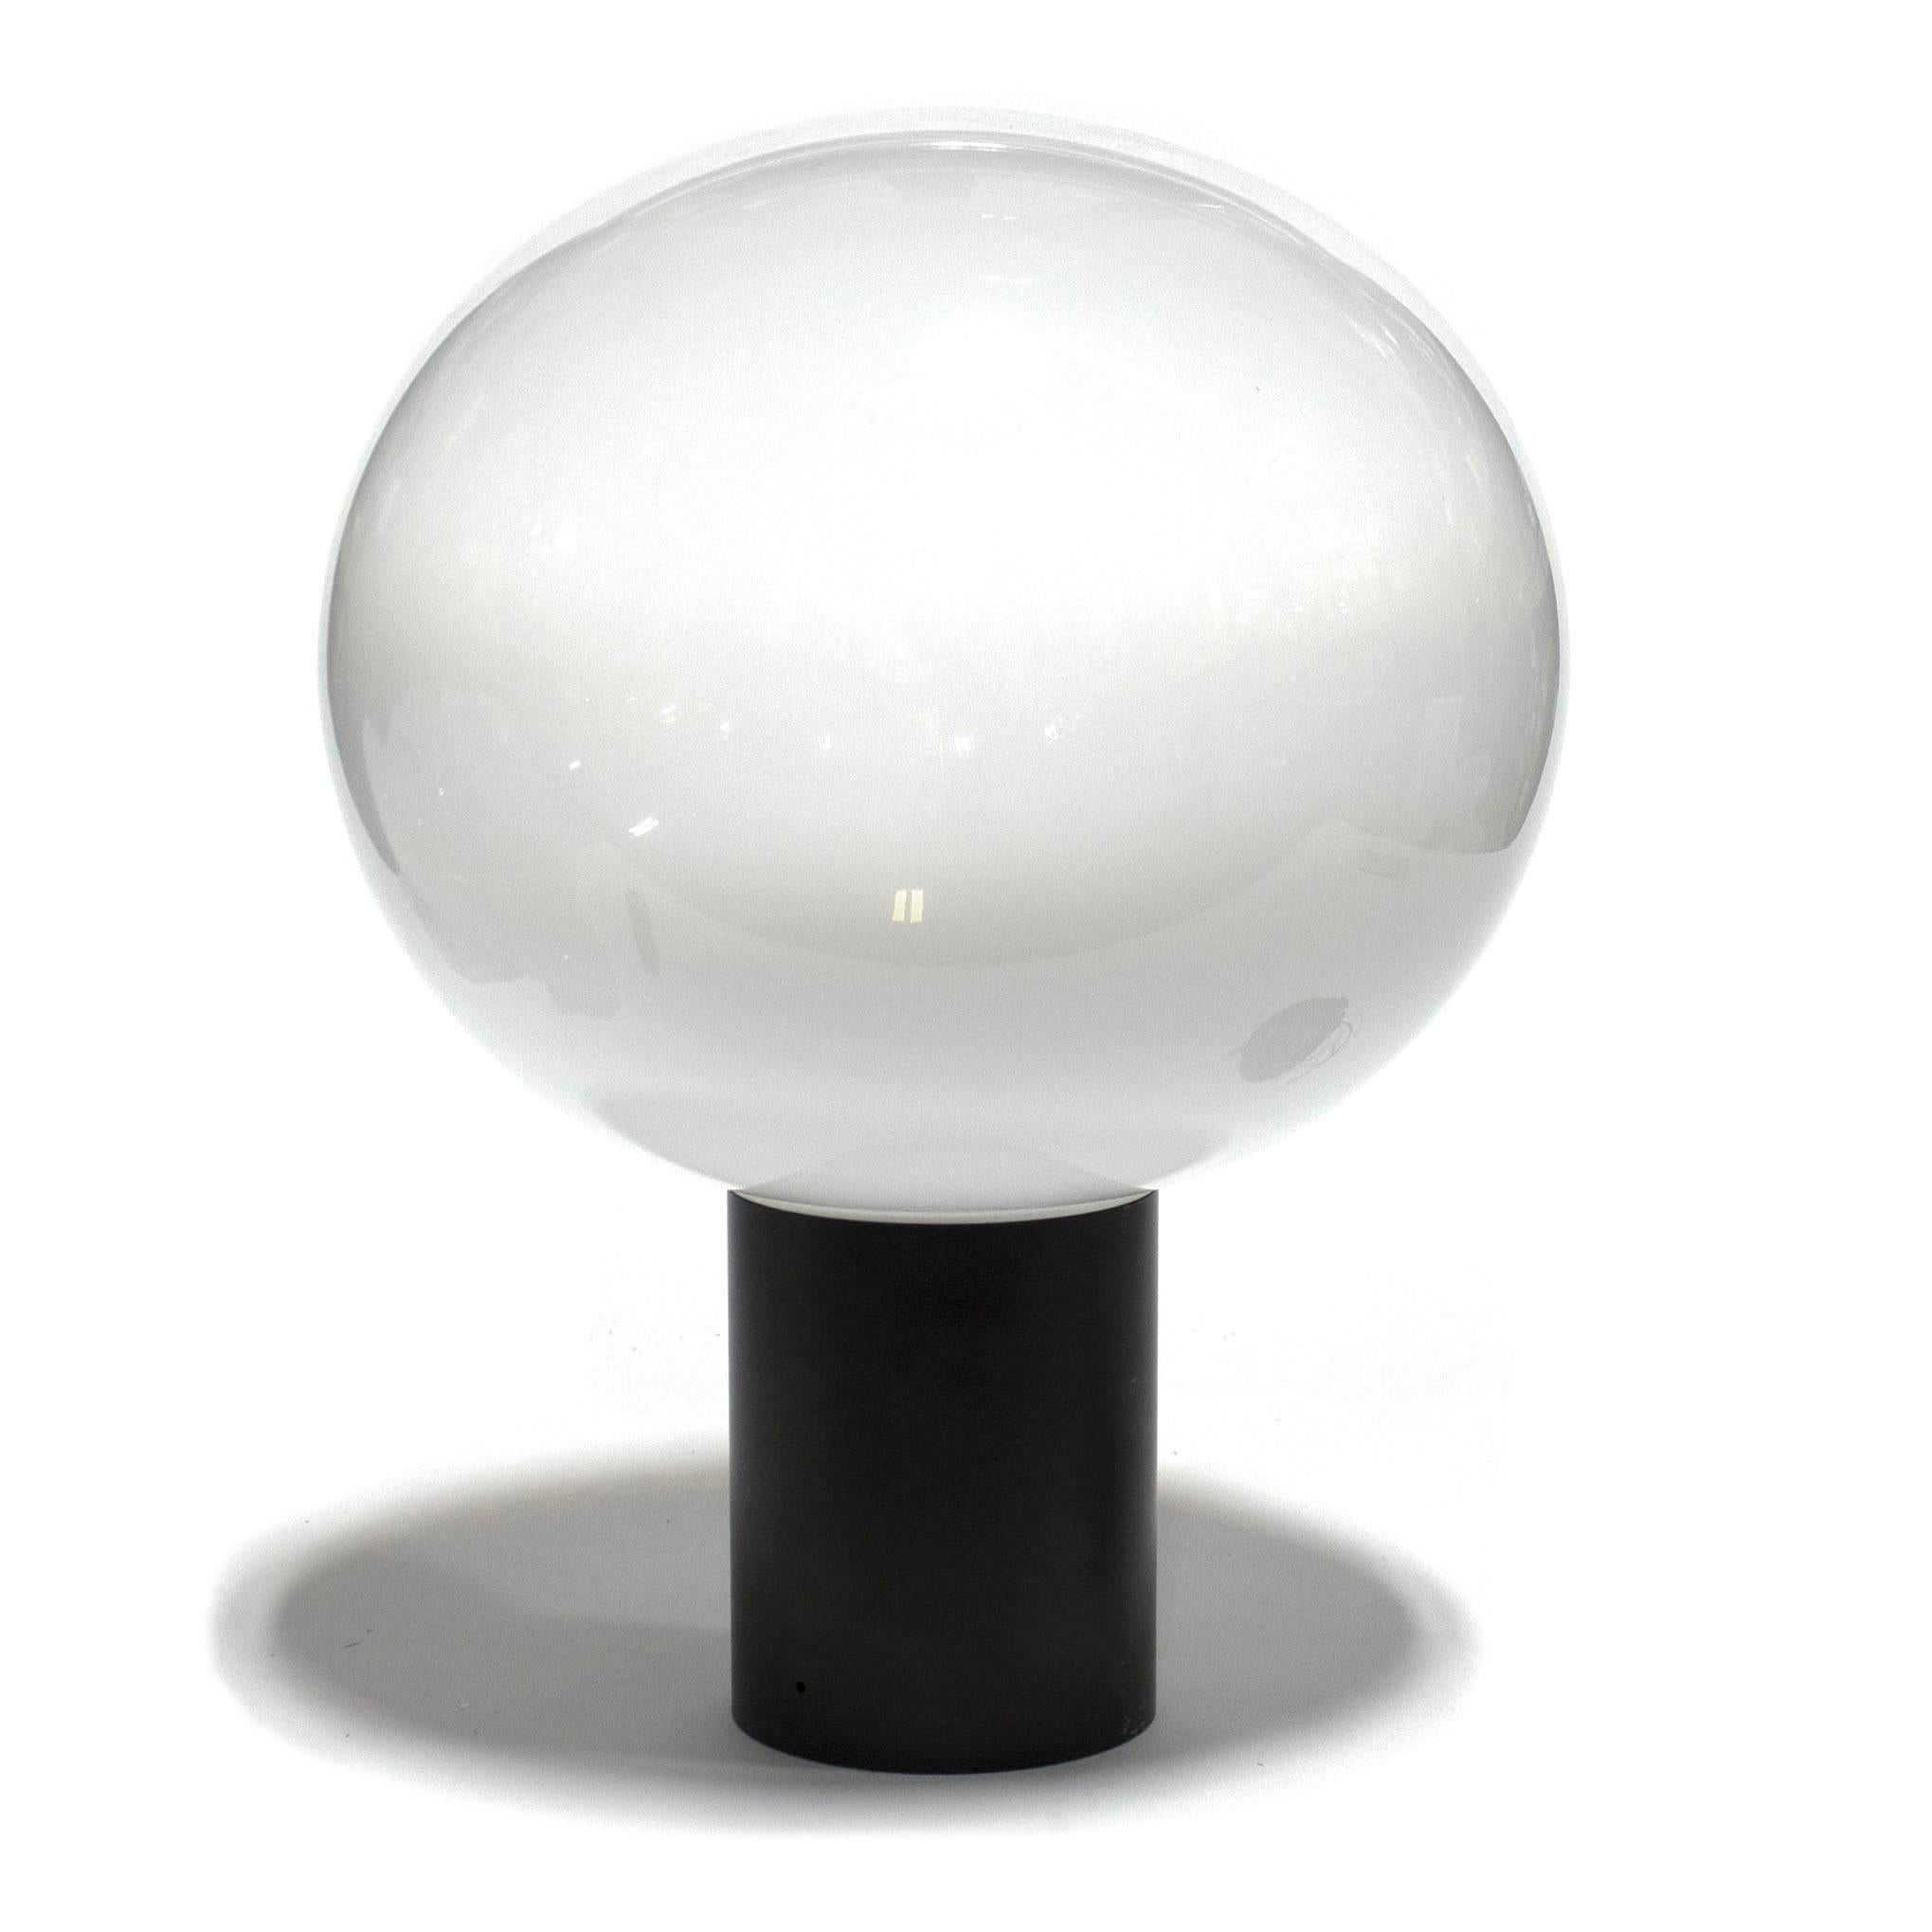 Laguna is a wide collection of glass lighting available in three sizes. Features a black painted lamp body in extruded aluminum with a handblown glass diffuser. The milky white, handblown glass has crystal nuances which produce a soft spot light on